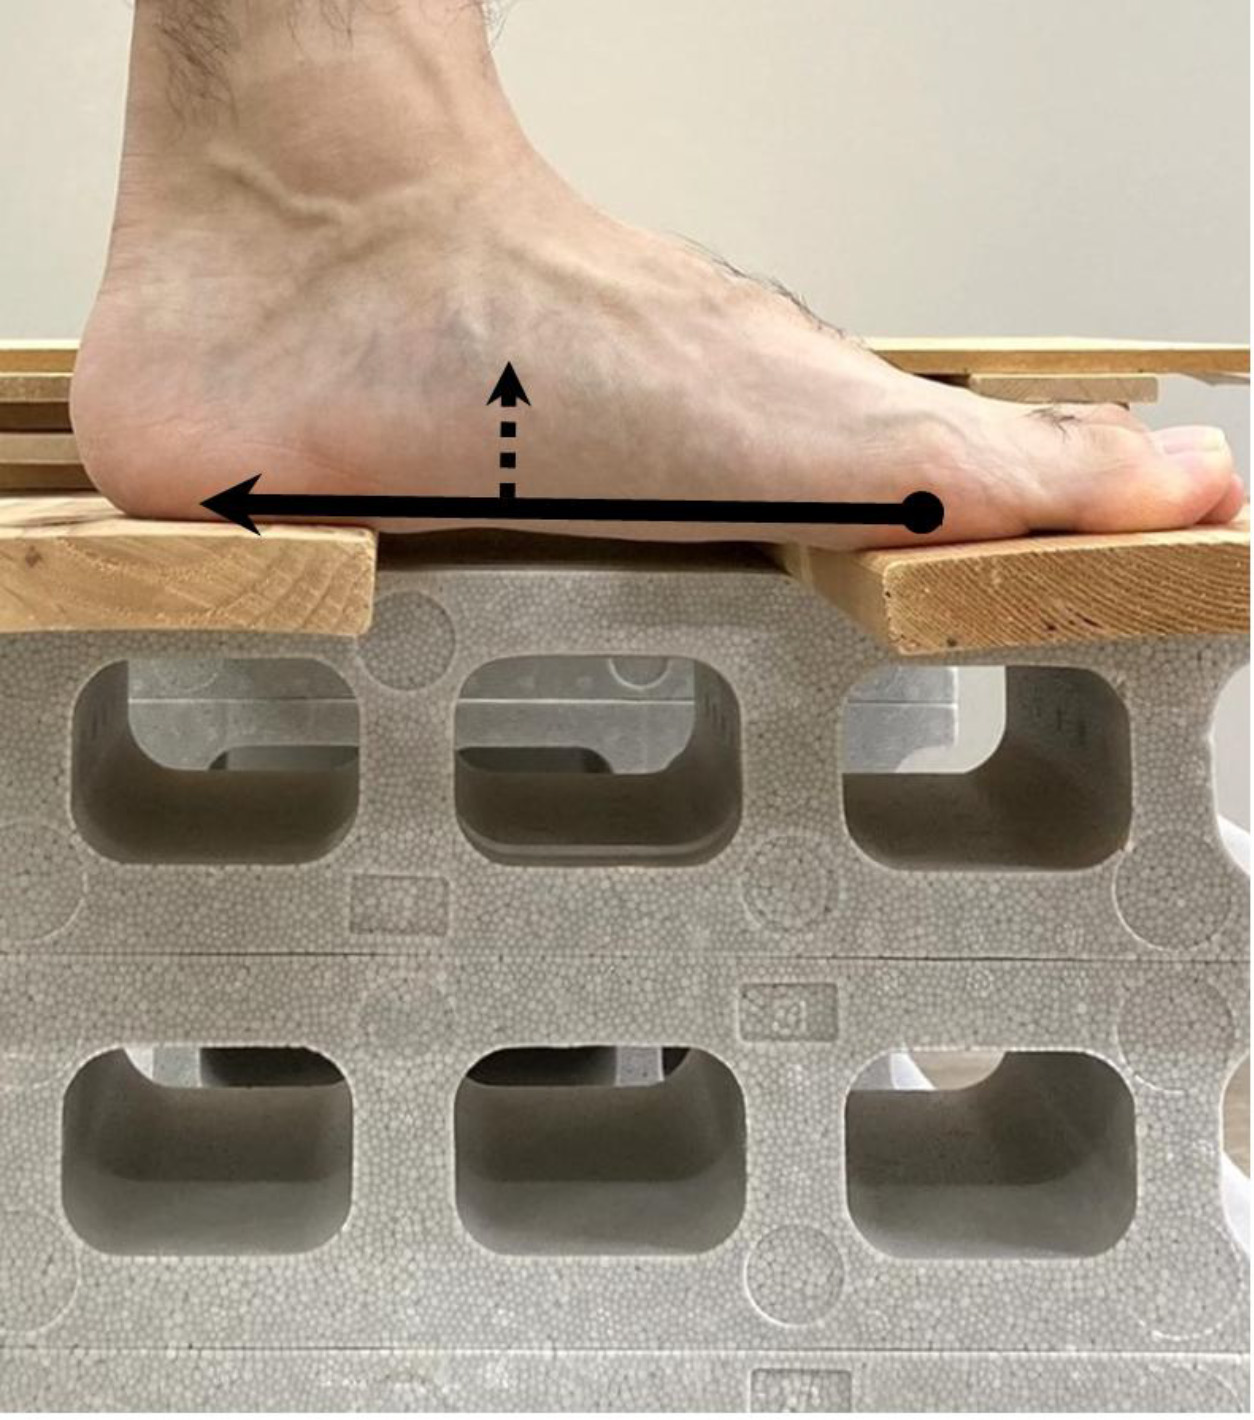 Short-foot exercise. The participants were instructed to shorten the foot in the anterior-posterior direction by attempting to bring the head of the first metatarsal toward the heel without toe flexion (indicated by the black arrow) and to raise the medial longitudinal arch (indicated by the dotted arrow). The foot was positioned on a wooden board with an opening at the longitudinal foot arch. Shear wave elastography images of the plantar muscles were obtained by placing the probe on the plantar foot surface through the opening in the board.